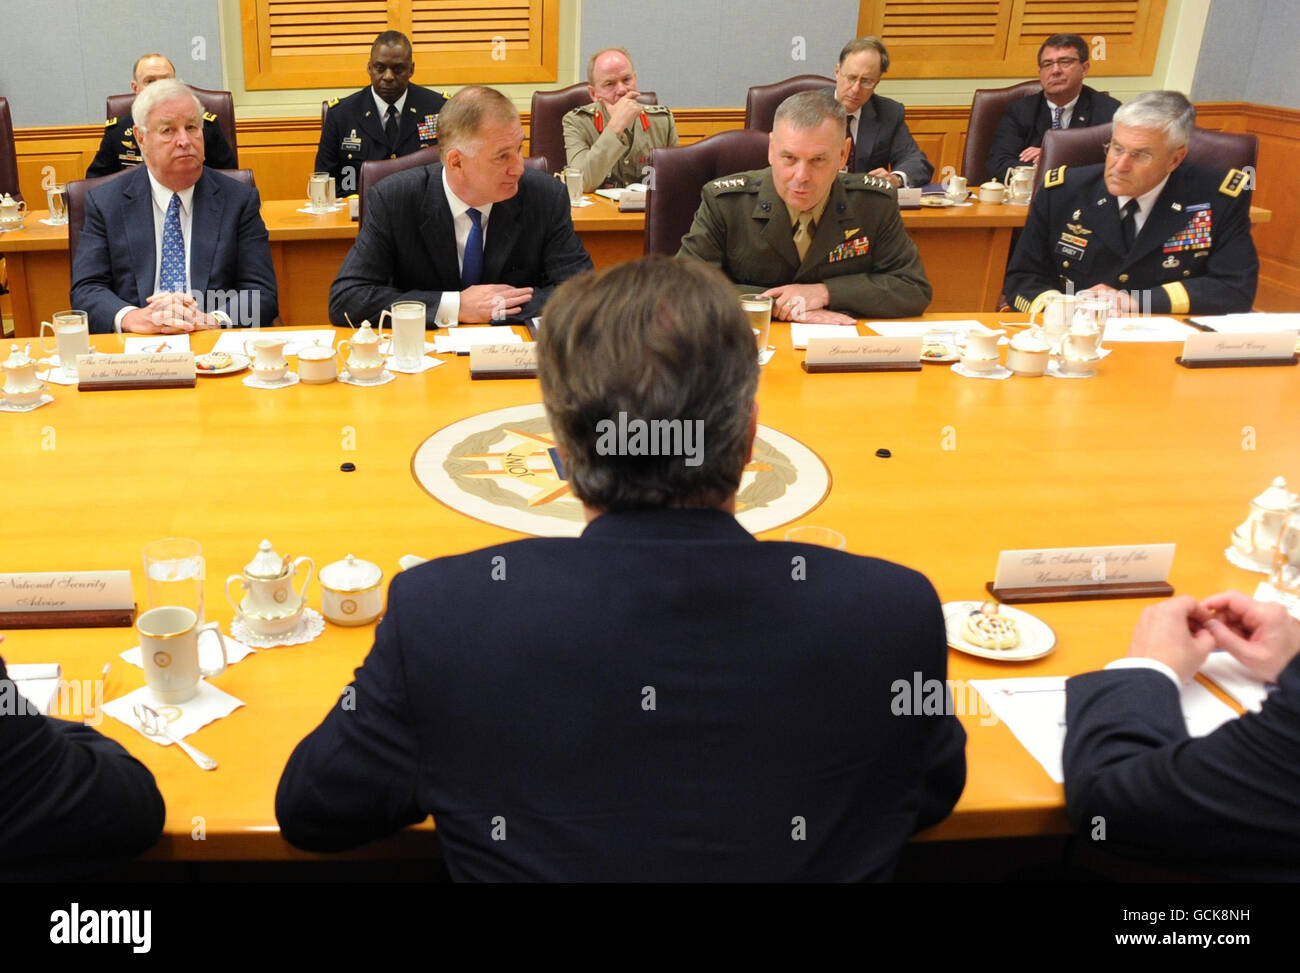 Prime Minister David Cameron with US Defence chiefs in 'The Tank', a secure briefing room at the Pentagon in Washington D.C. today, during his visit to the United States capital. Stock Photo